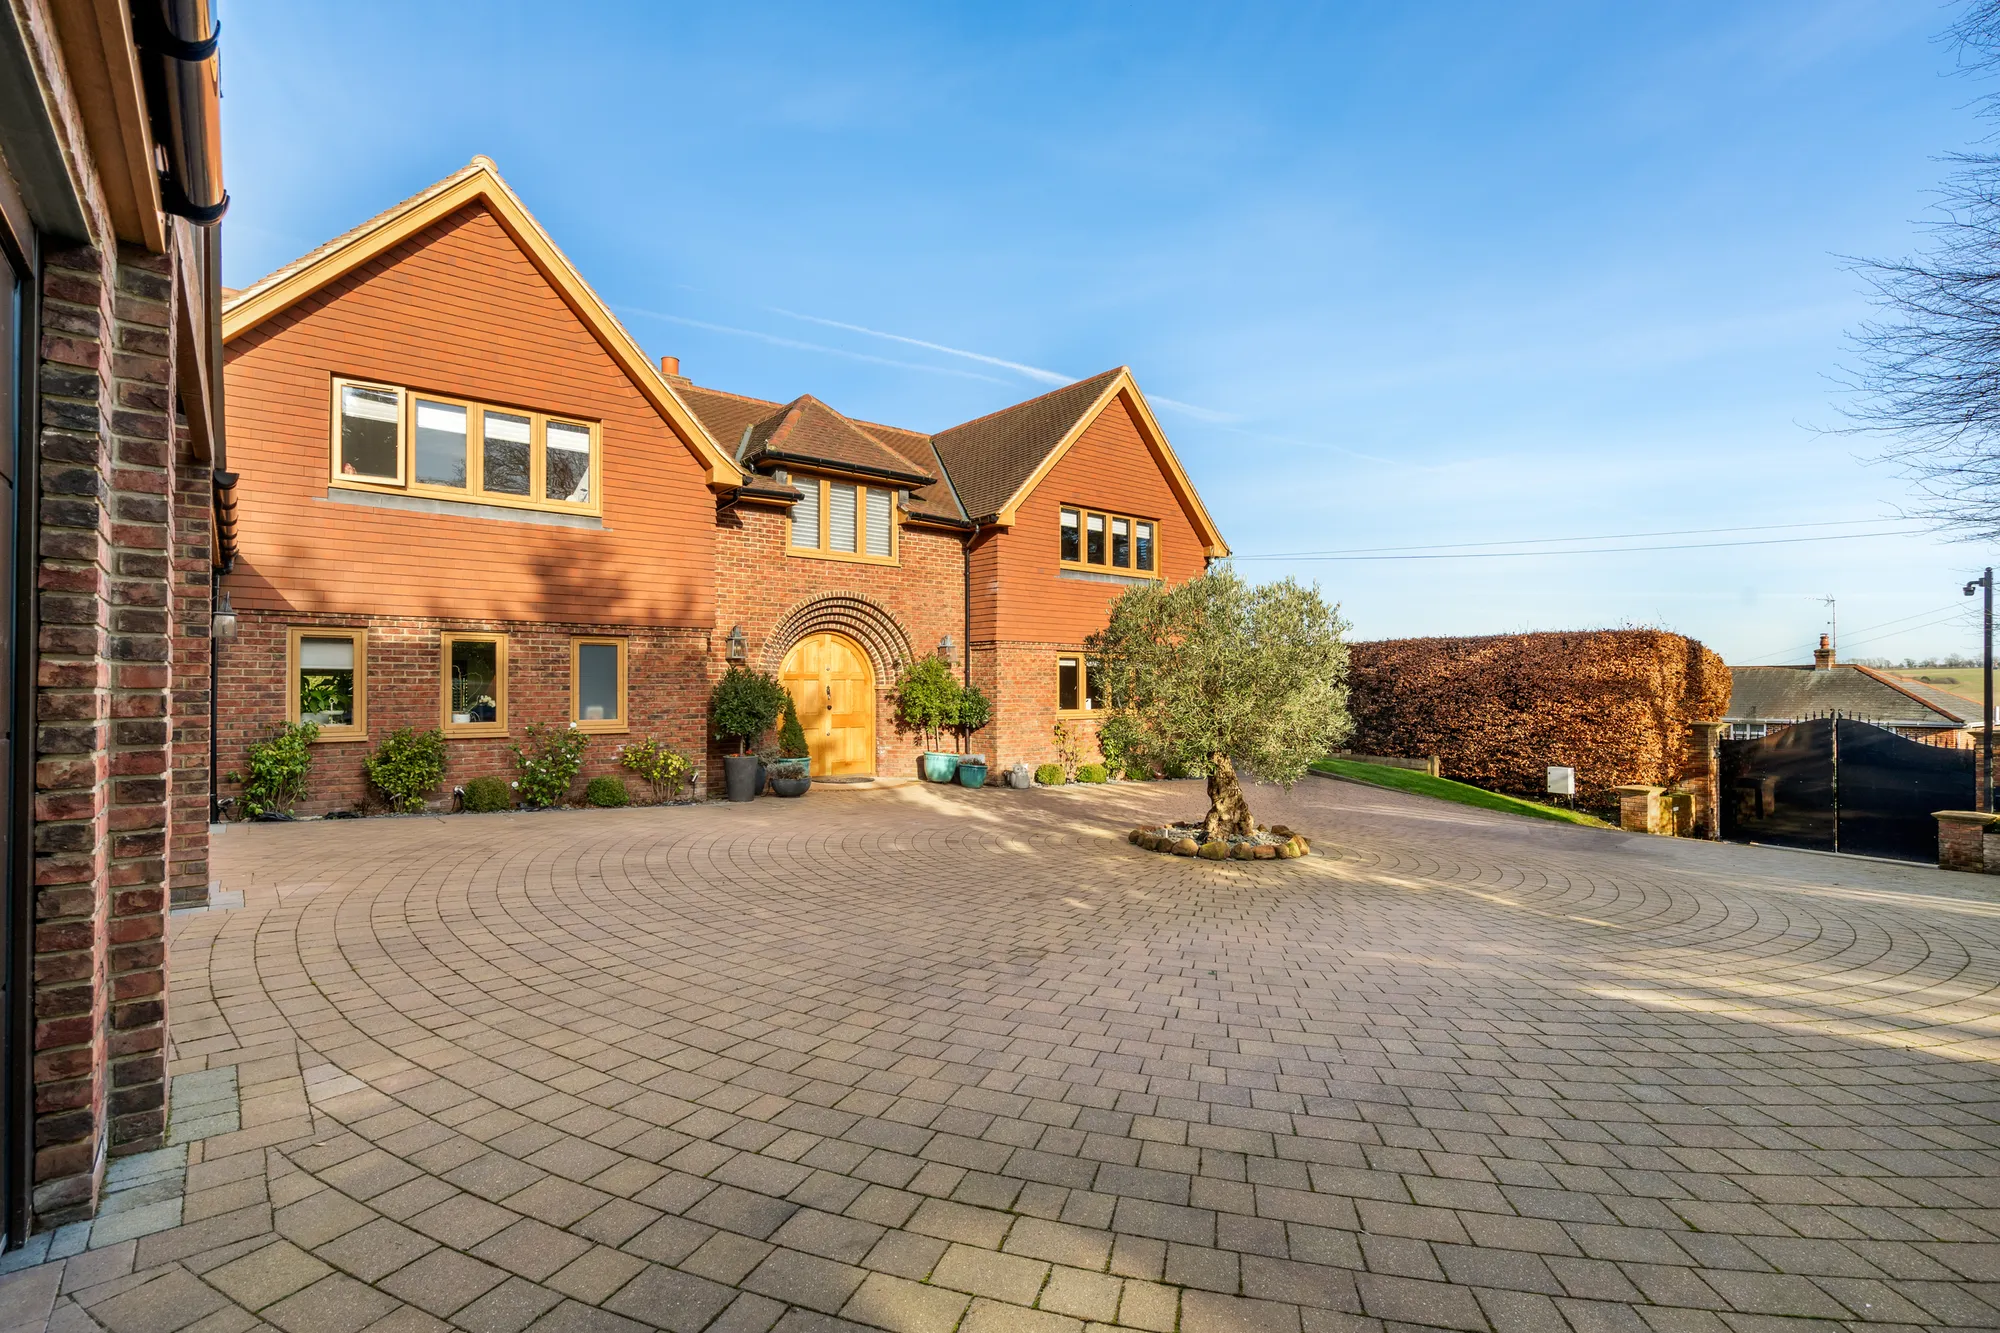 4 bed detached house for sale in Lunghurst Road, Caterham - Property Image 1